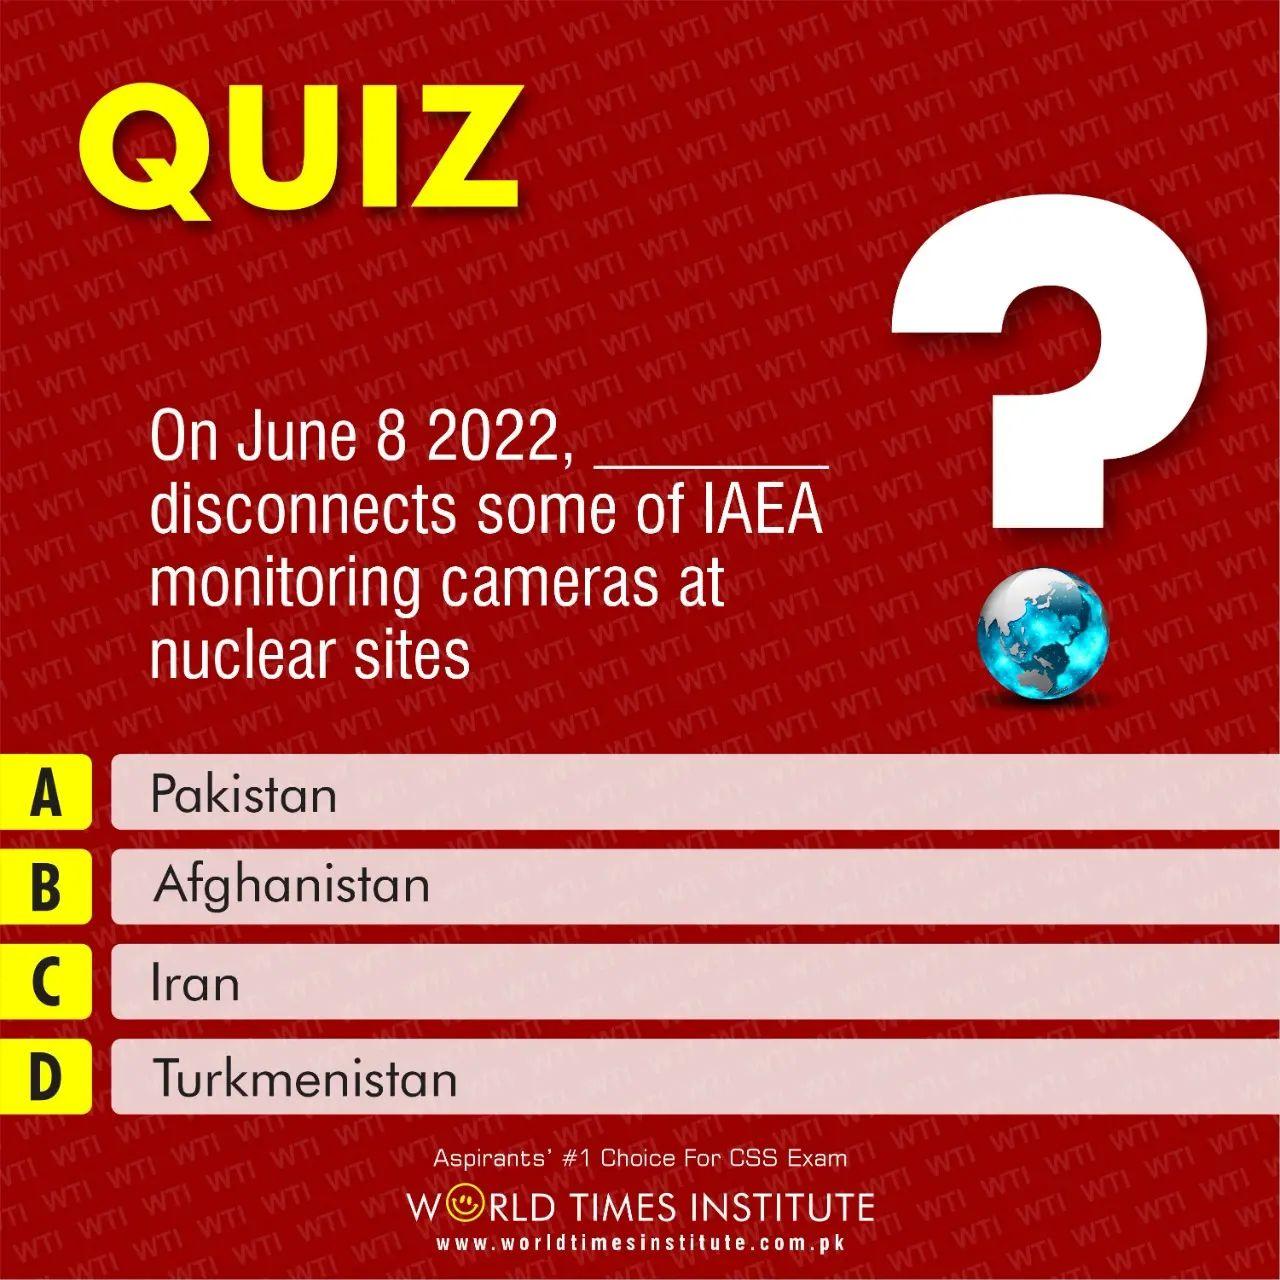 You are currently viewing Quiz of the Day 01-07-2022